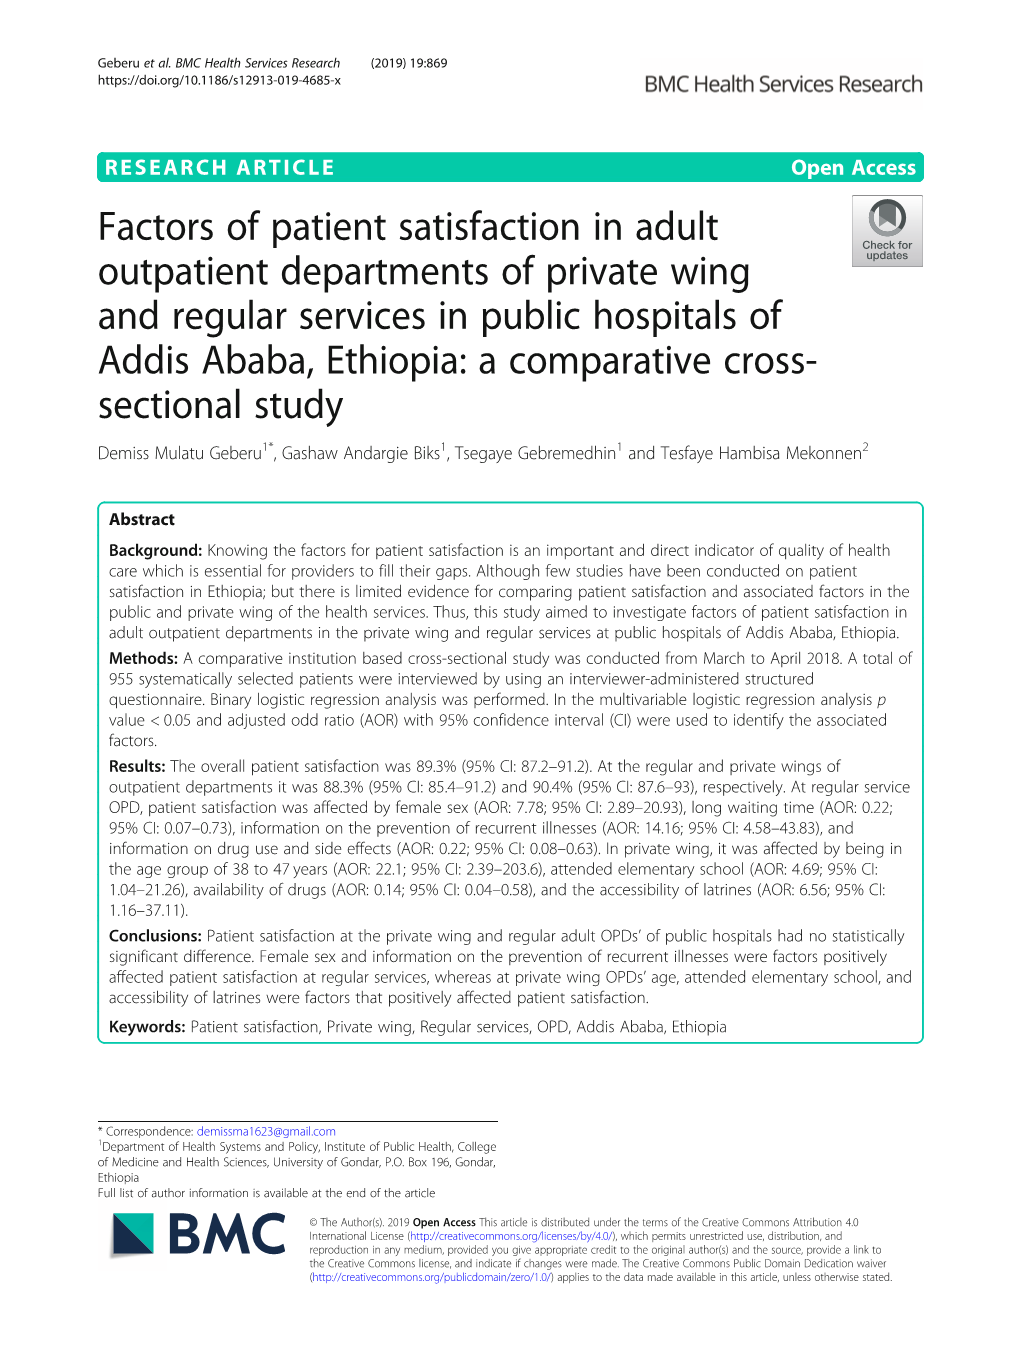 Factors of Patient Satisfaction in Adult Outpatient Departments of Private